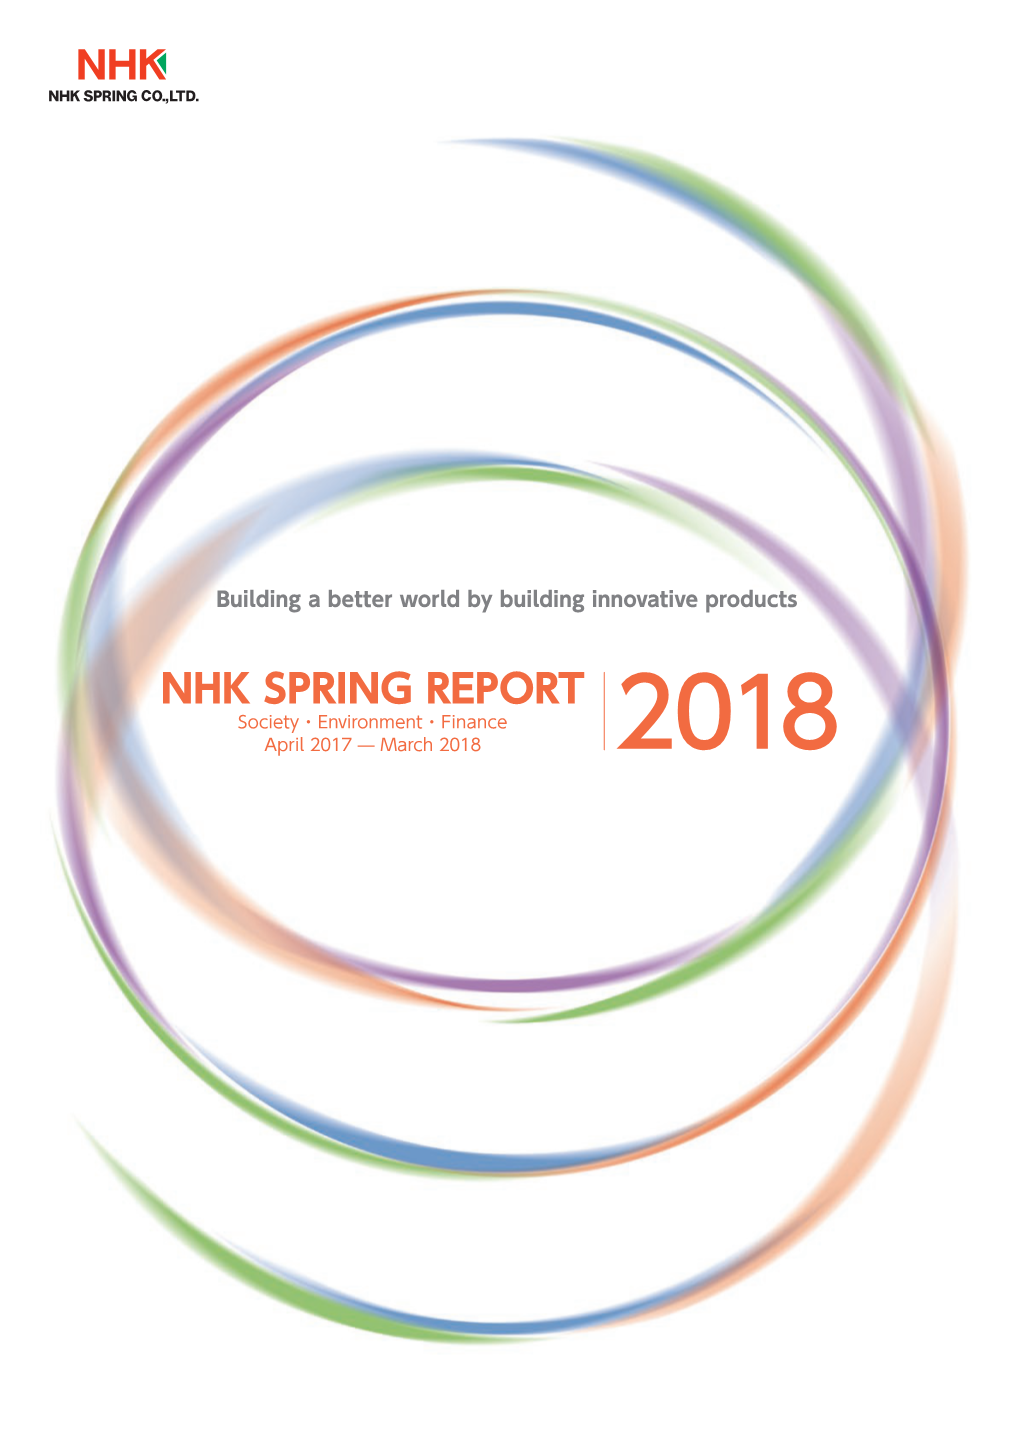 2018 NHK Spring Report Is Our 11Th